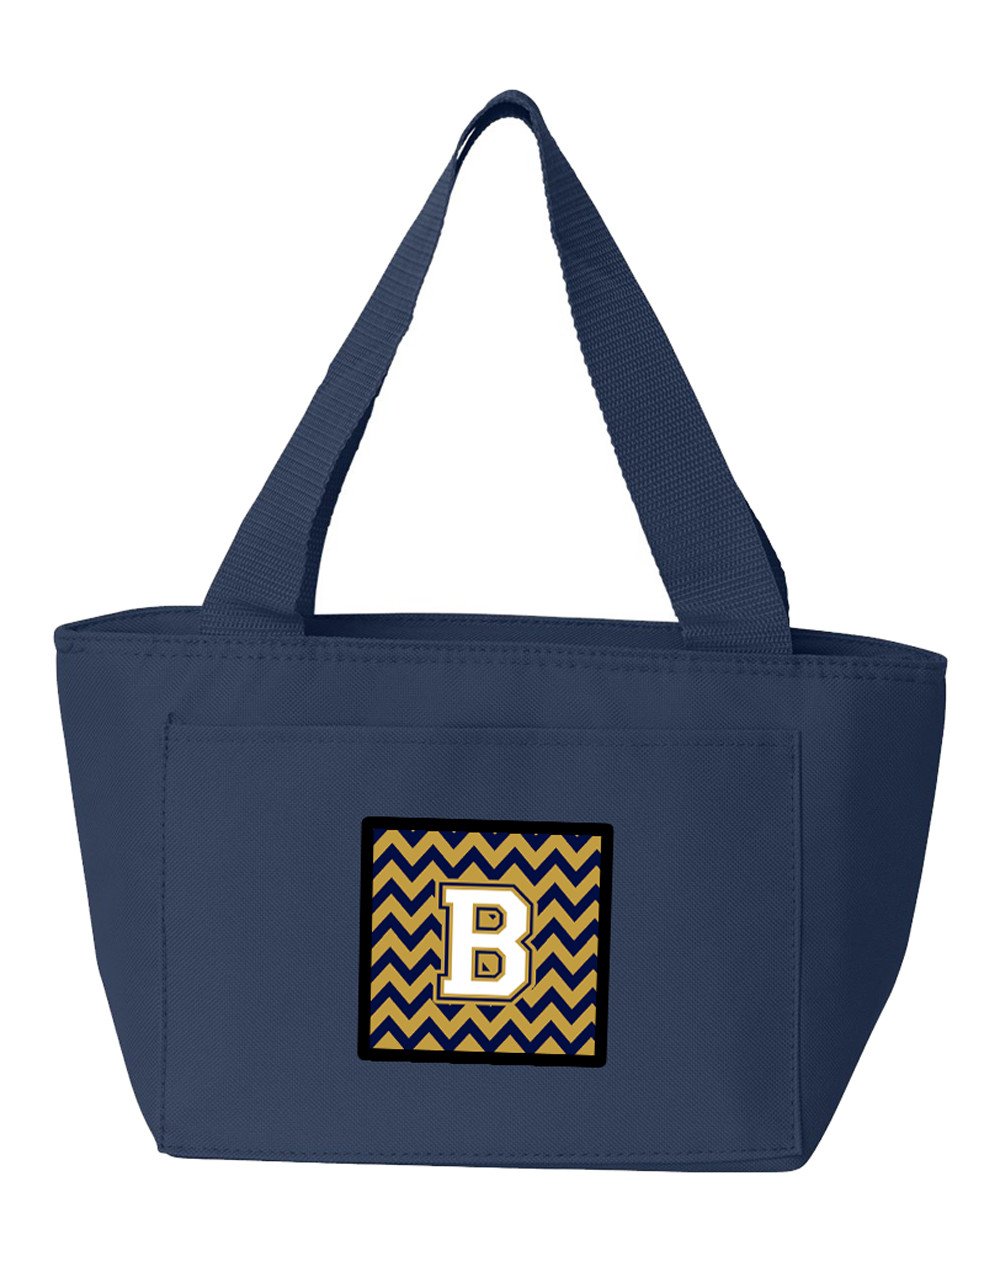 Letter B Chevron Navy Blue and Gold Lunch Bag CJ1057-BNA-8808 by Caroline's Treasures